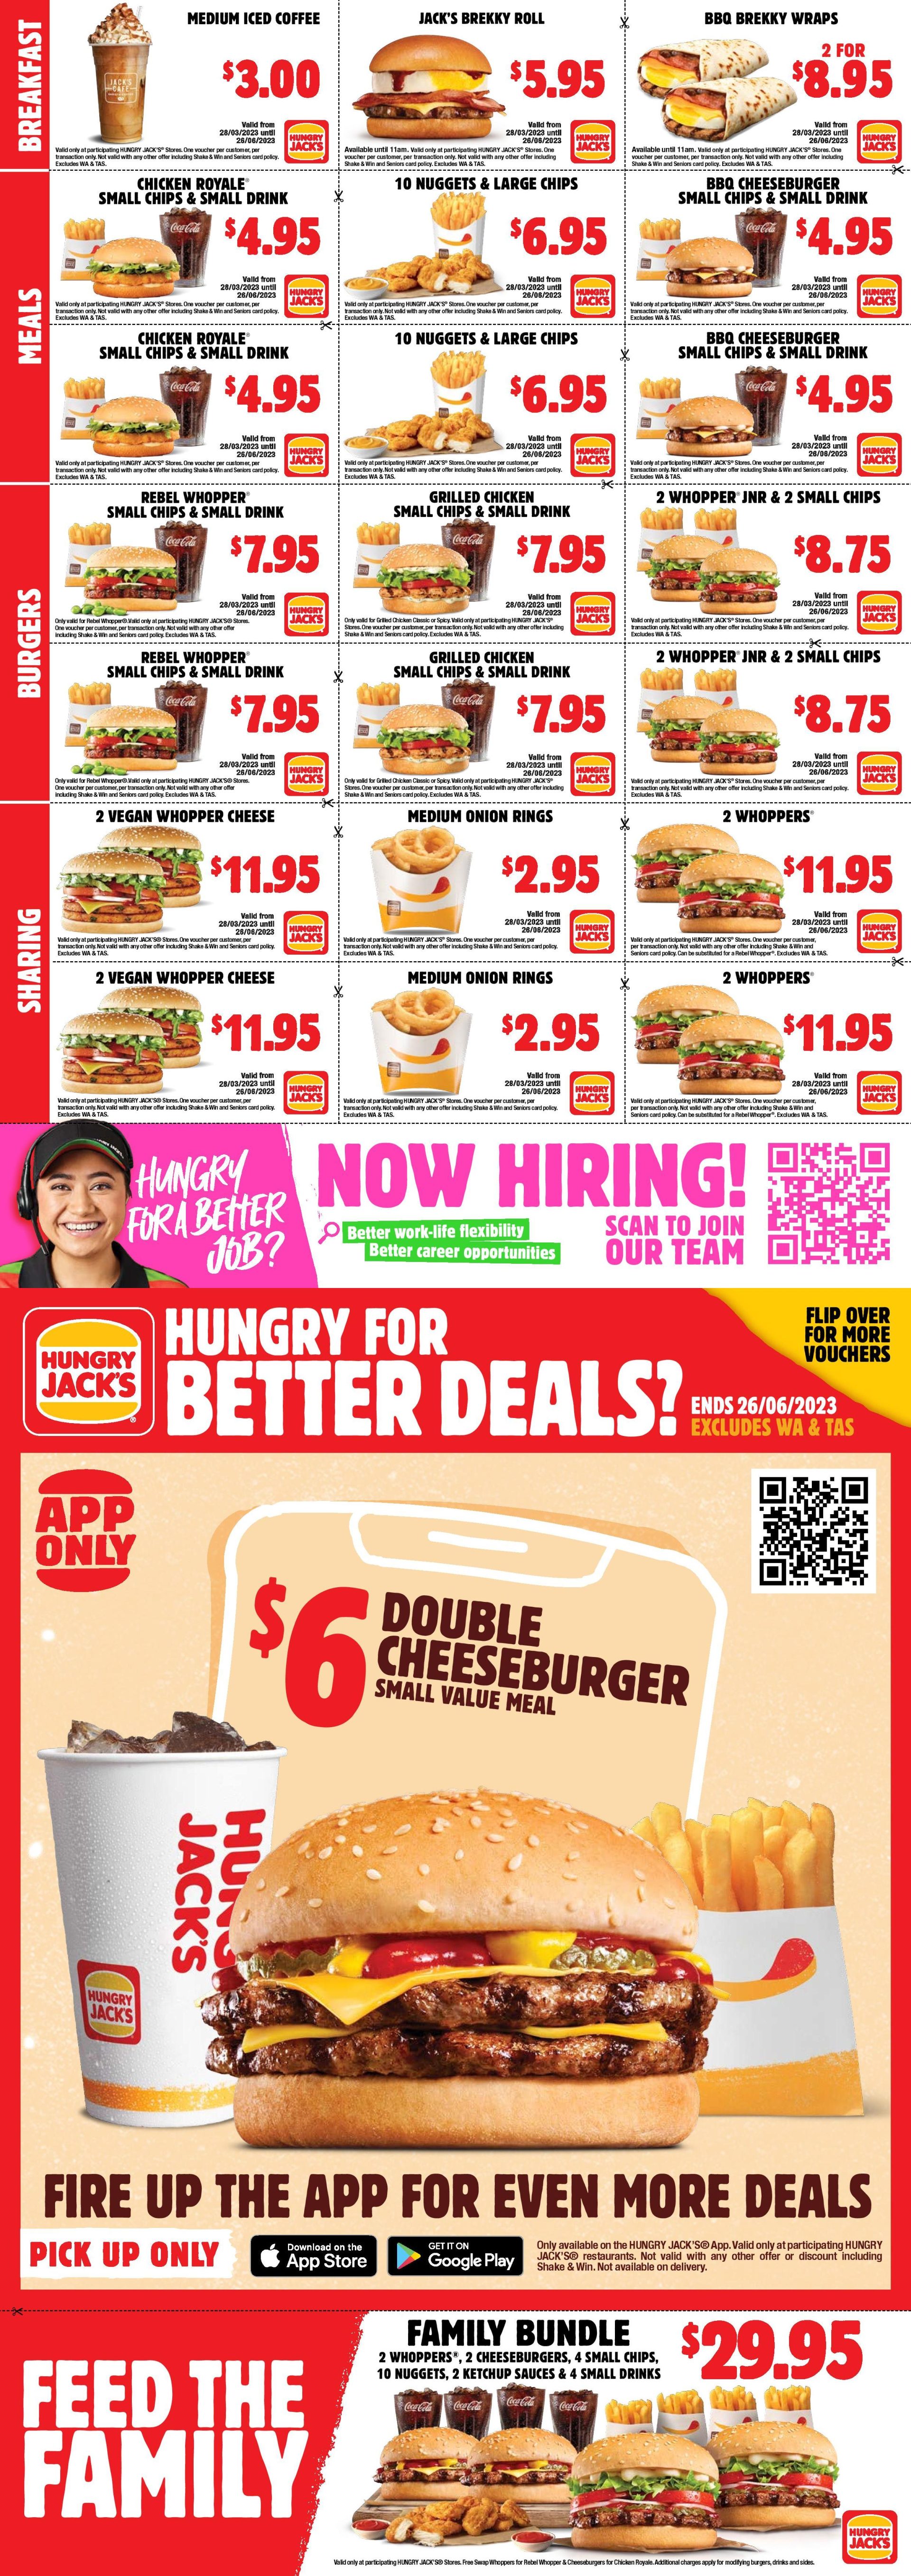 Hungry Jacks Vouchers / Coupons / Deals (June 2023) frugal feeds